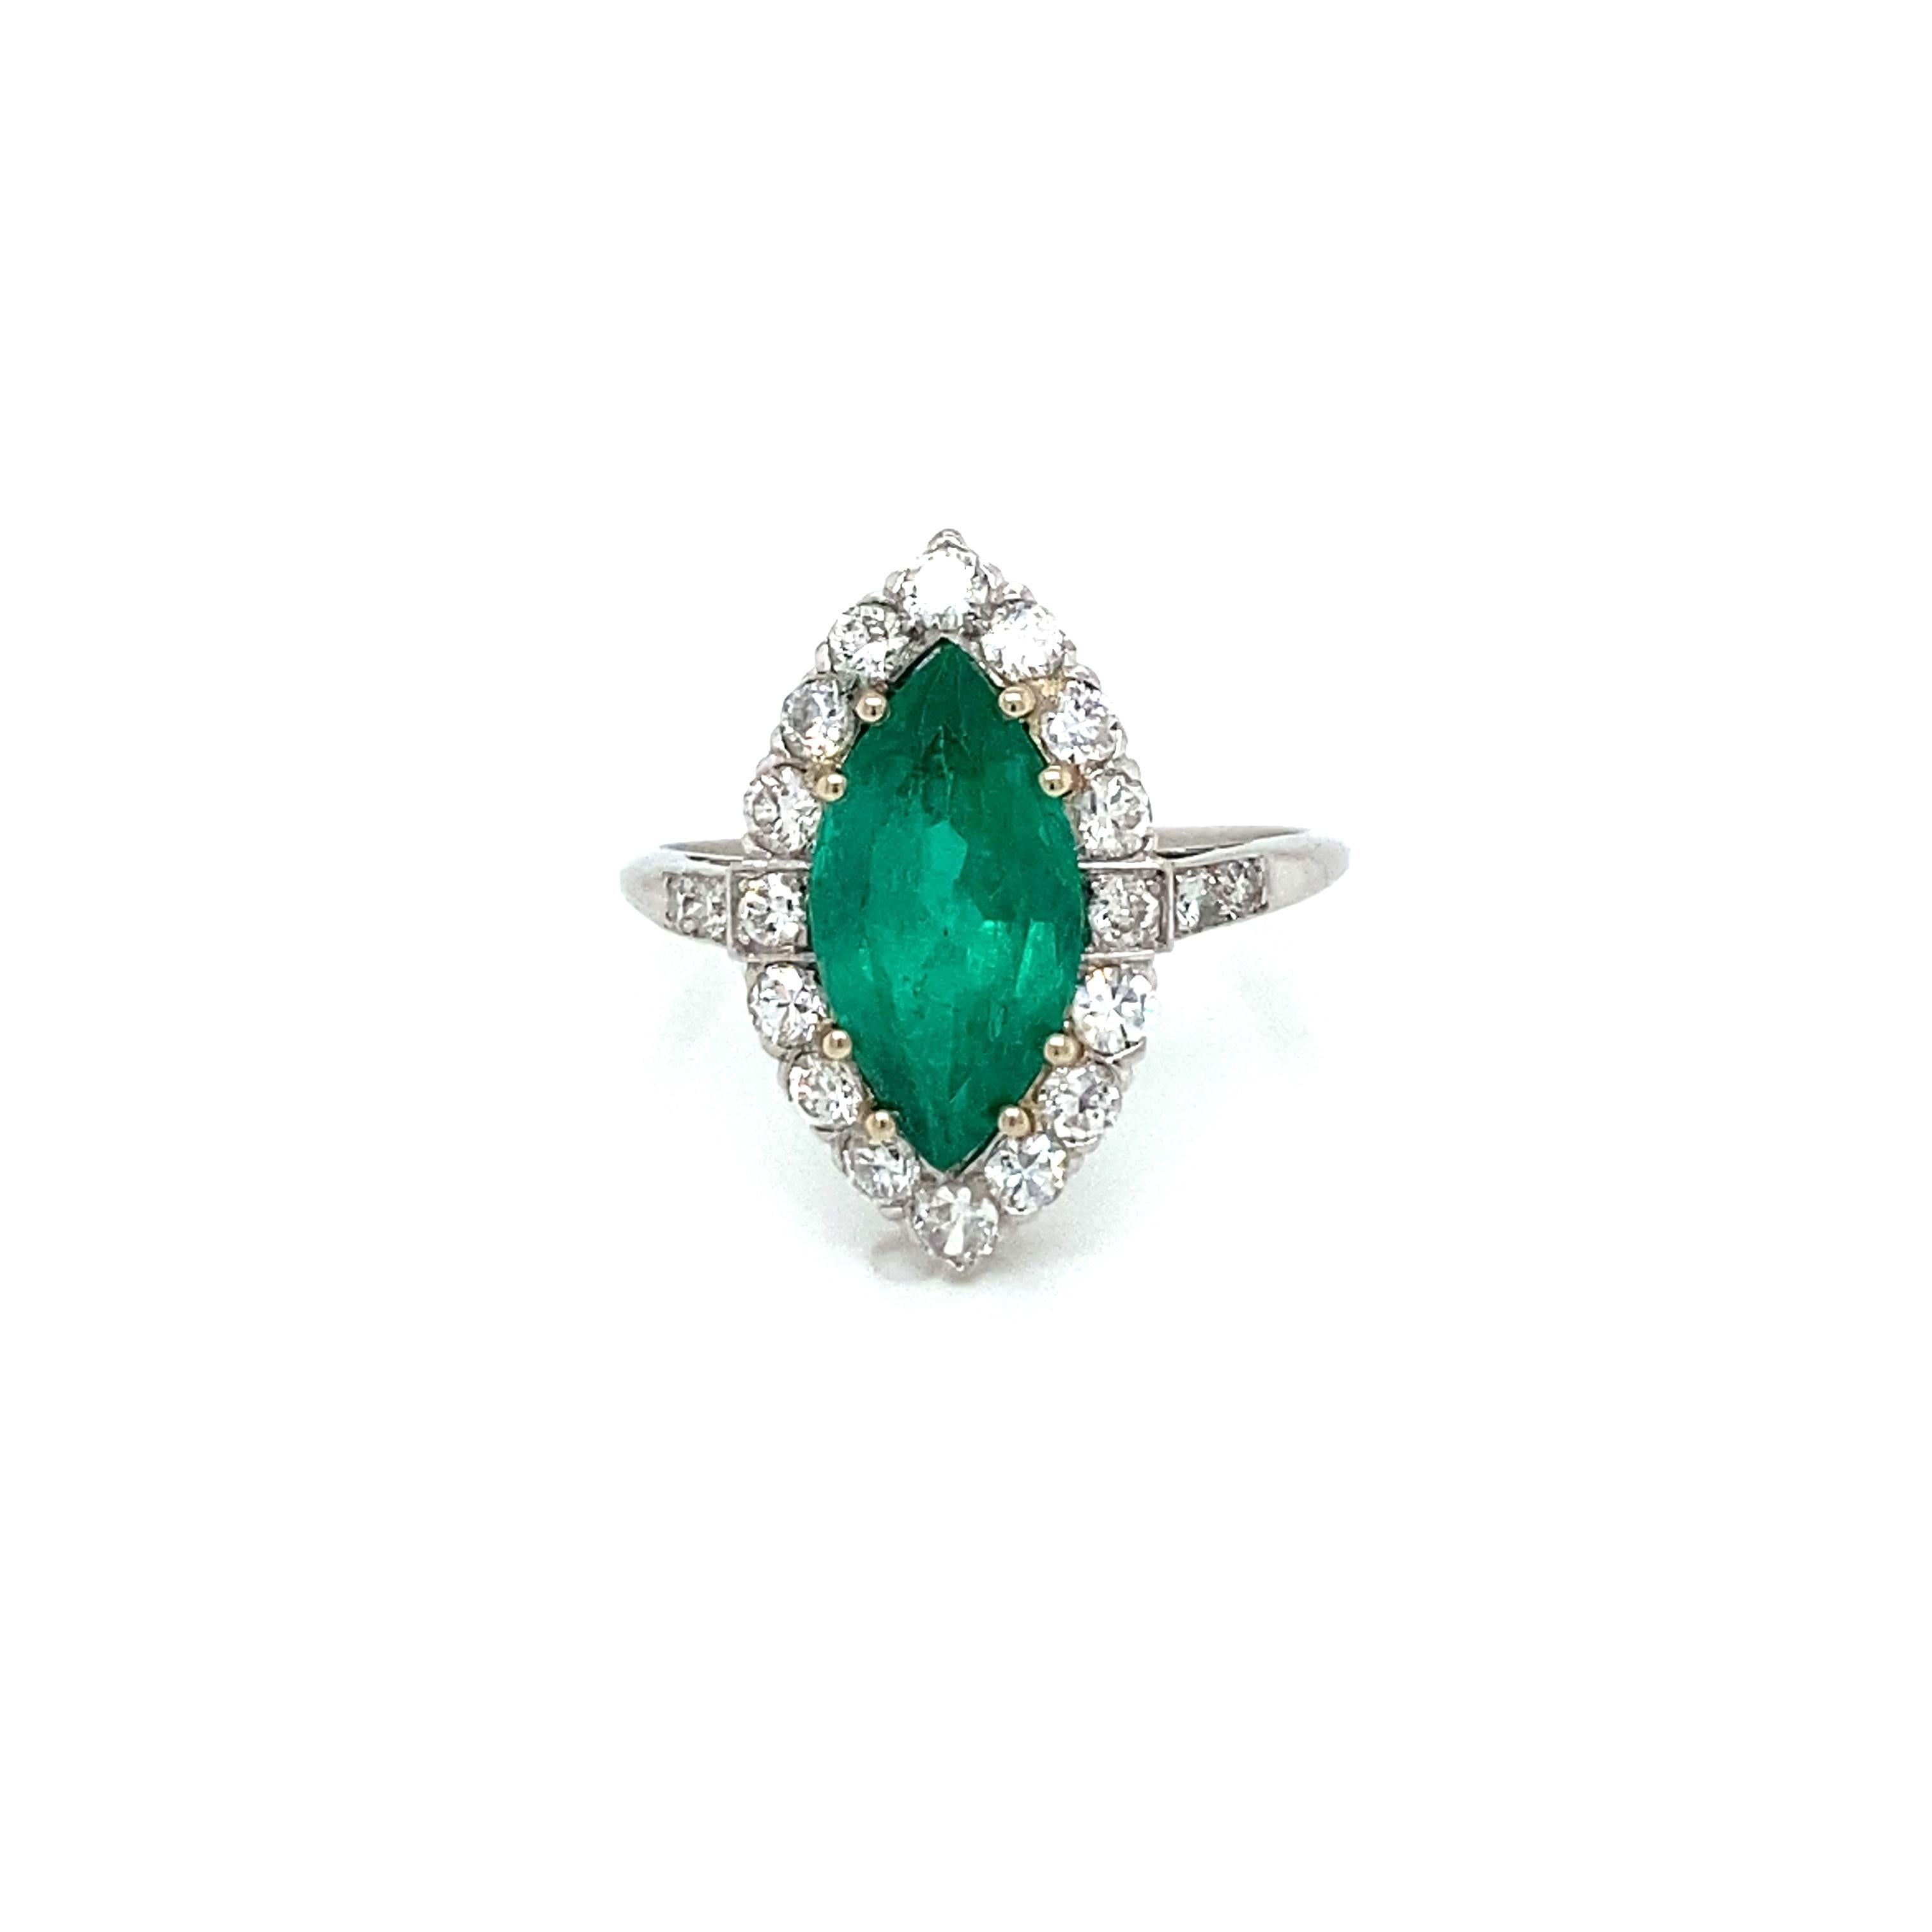 Beautiful Handcrafted Platinum Gold Zambian Emerald and Diamond Engagement ring. 
The cluster style ring is centered with 2.10 carat Marquise Vivid green Natural Emerald, accented by 20 Old mine cut diamonds weighing approx. 0,30 carats total. and